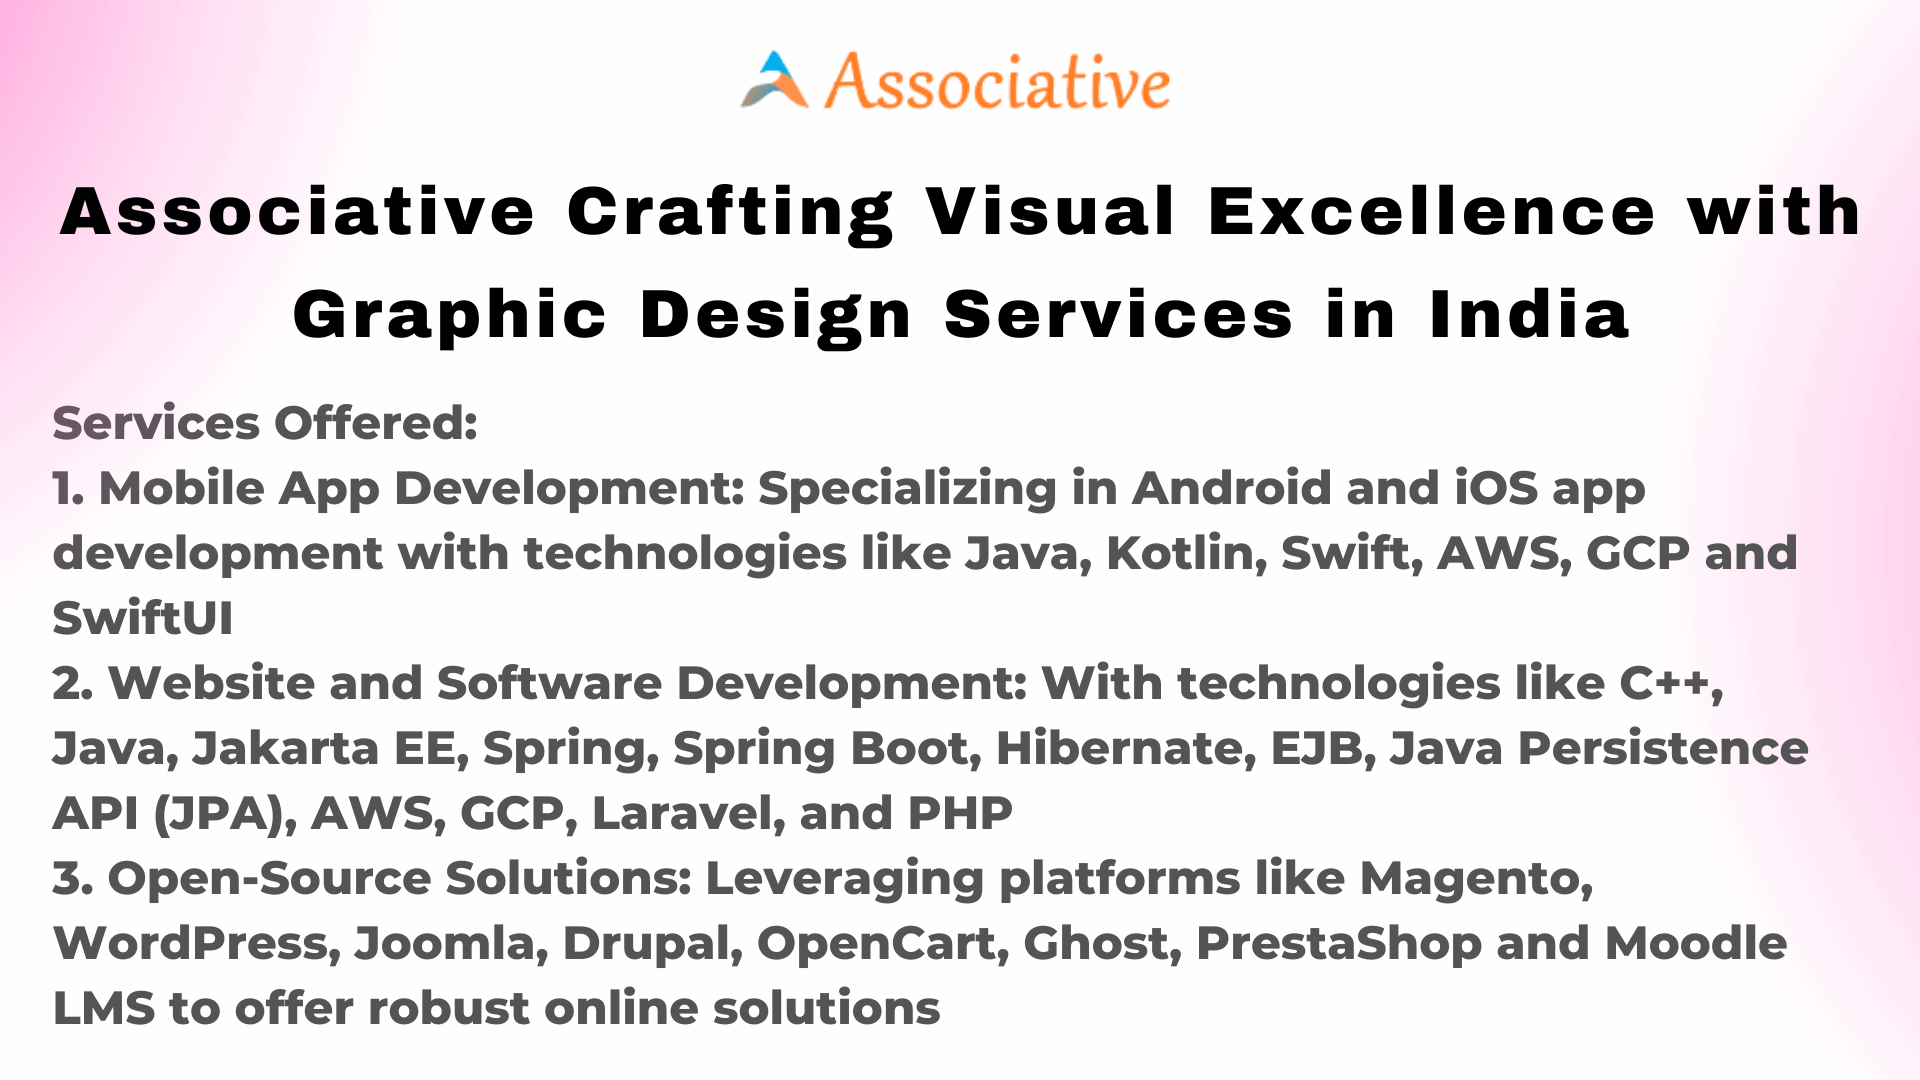 Associative Crafting Visual Excellence with Graphic Design Services in India